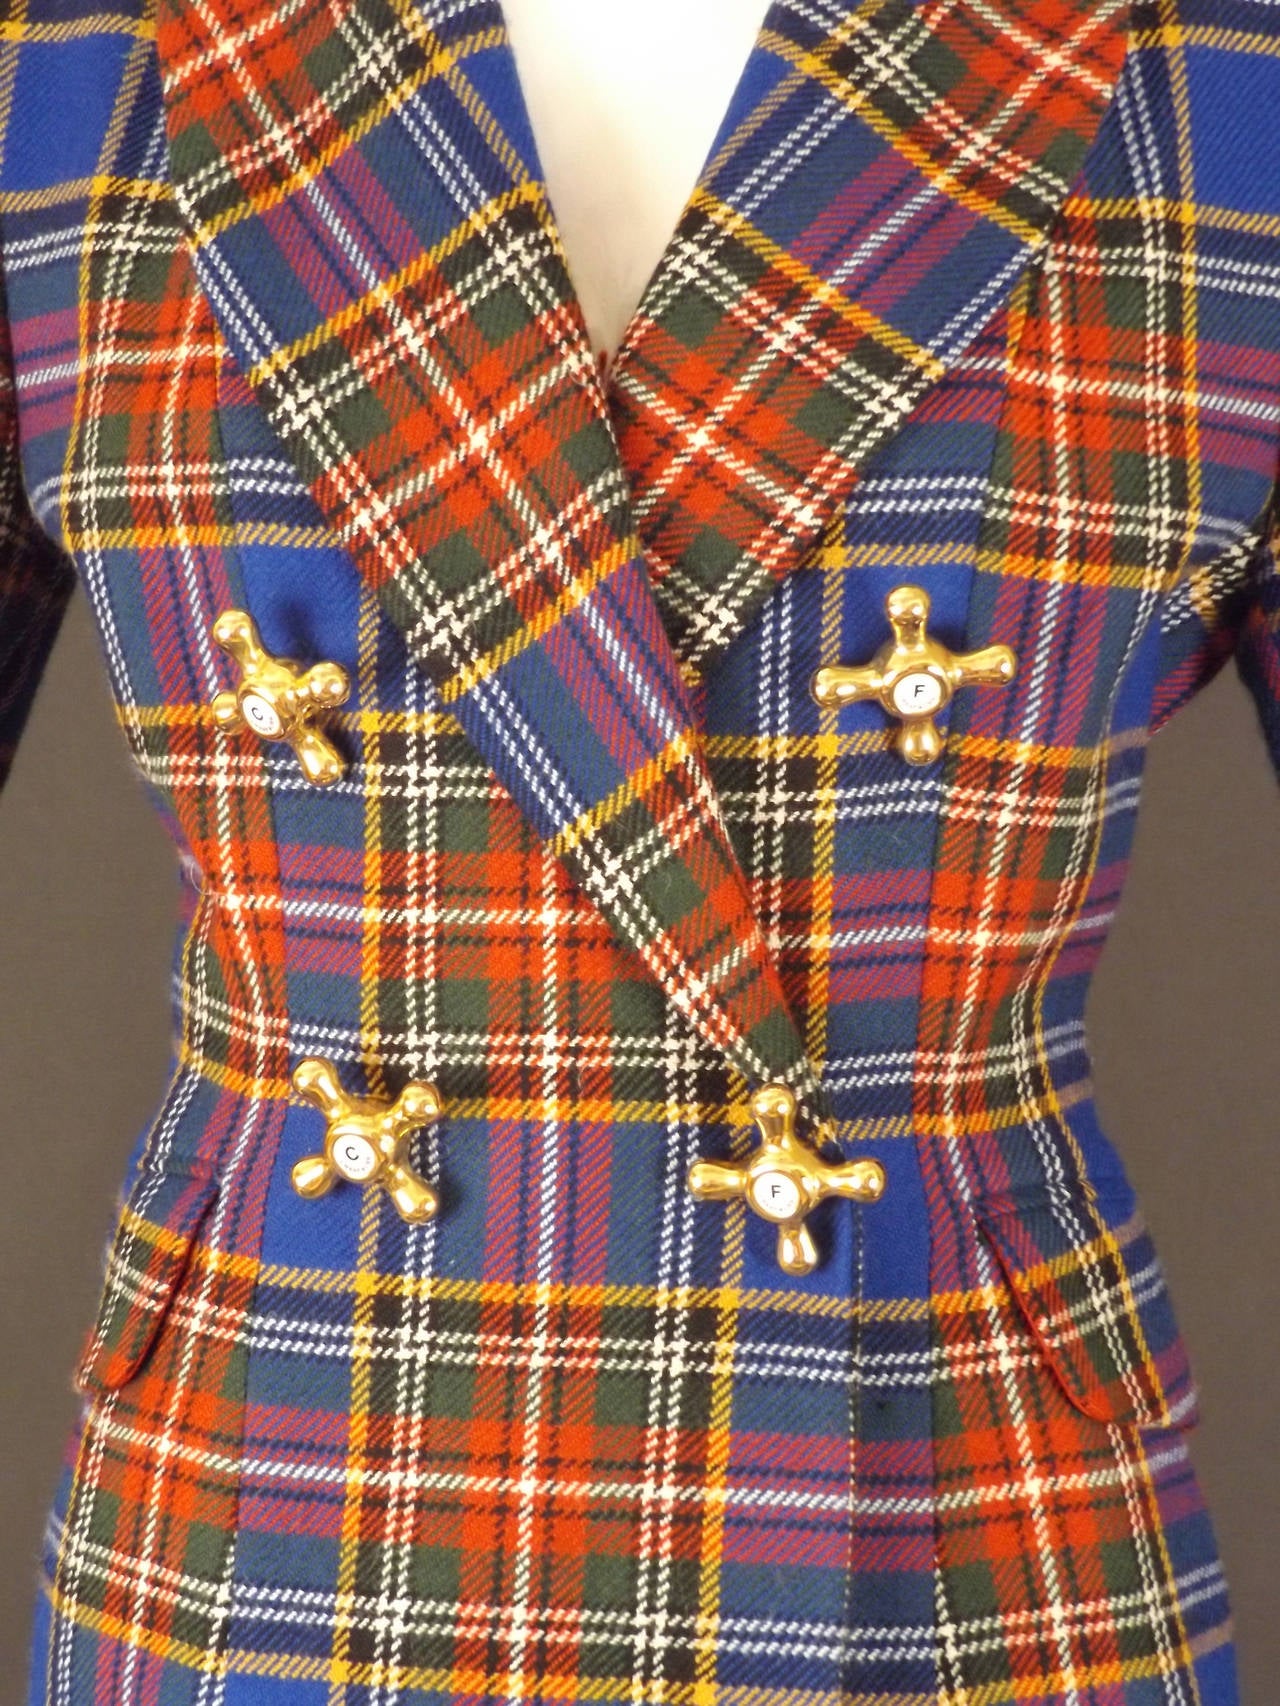 Fall, 1991 Collection. The suit is a blue, red, white, green and yellow wool plaid. Small collar and wide notched lapels.  Double breasted with snap and button closures hidden beneath the gold and white faucet button decorations. The faucets are